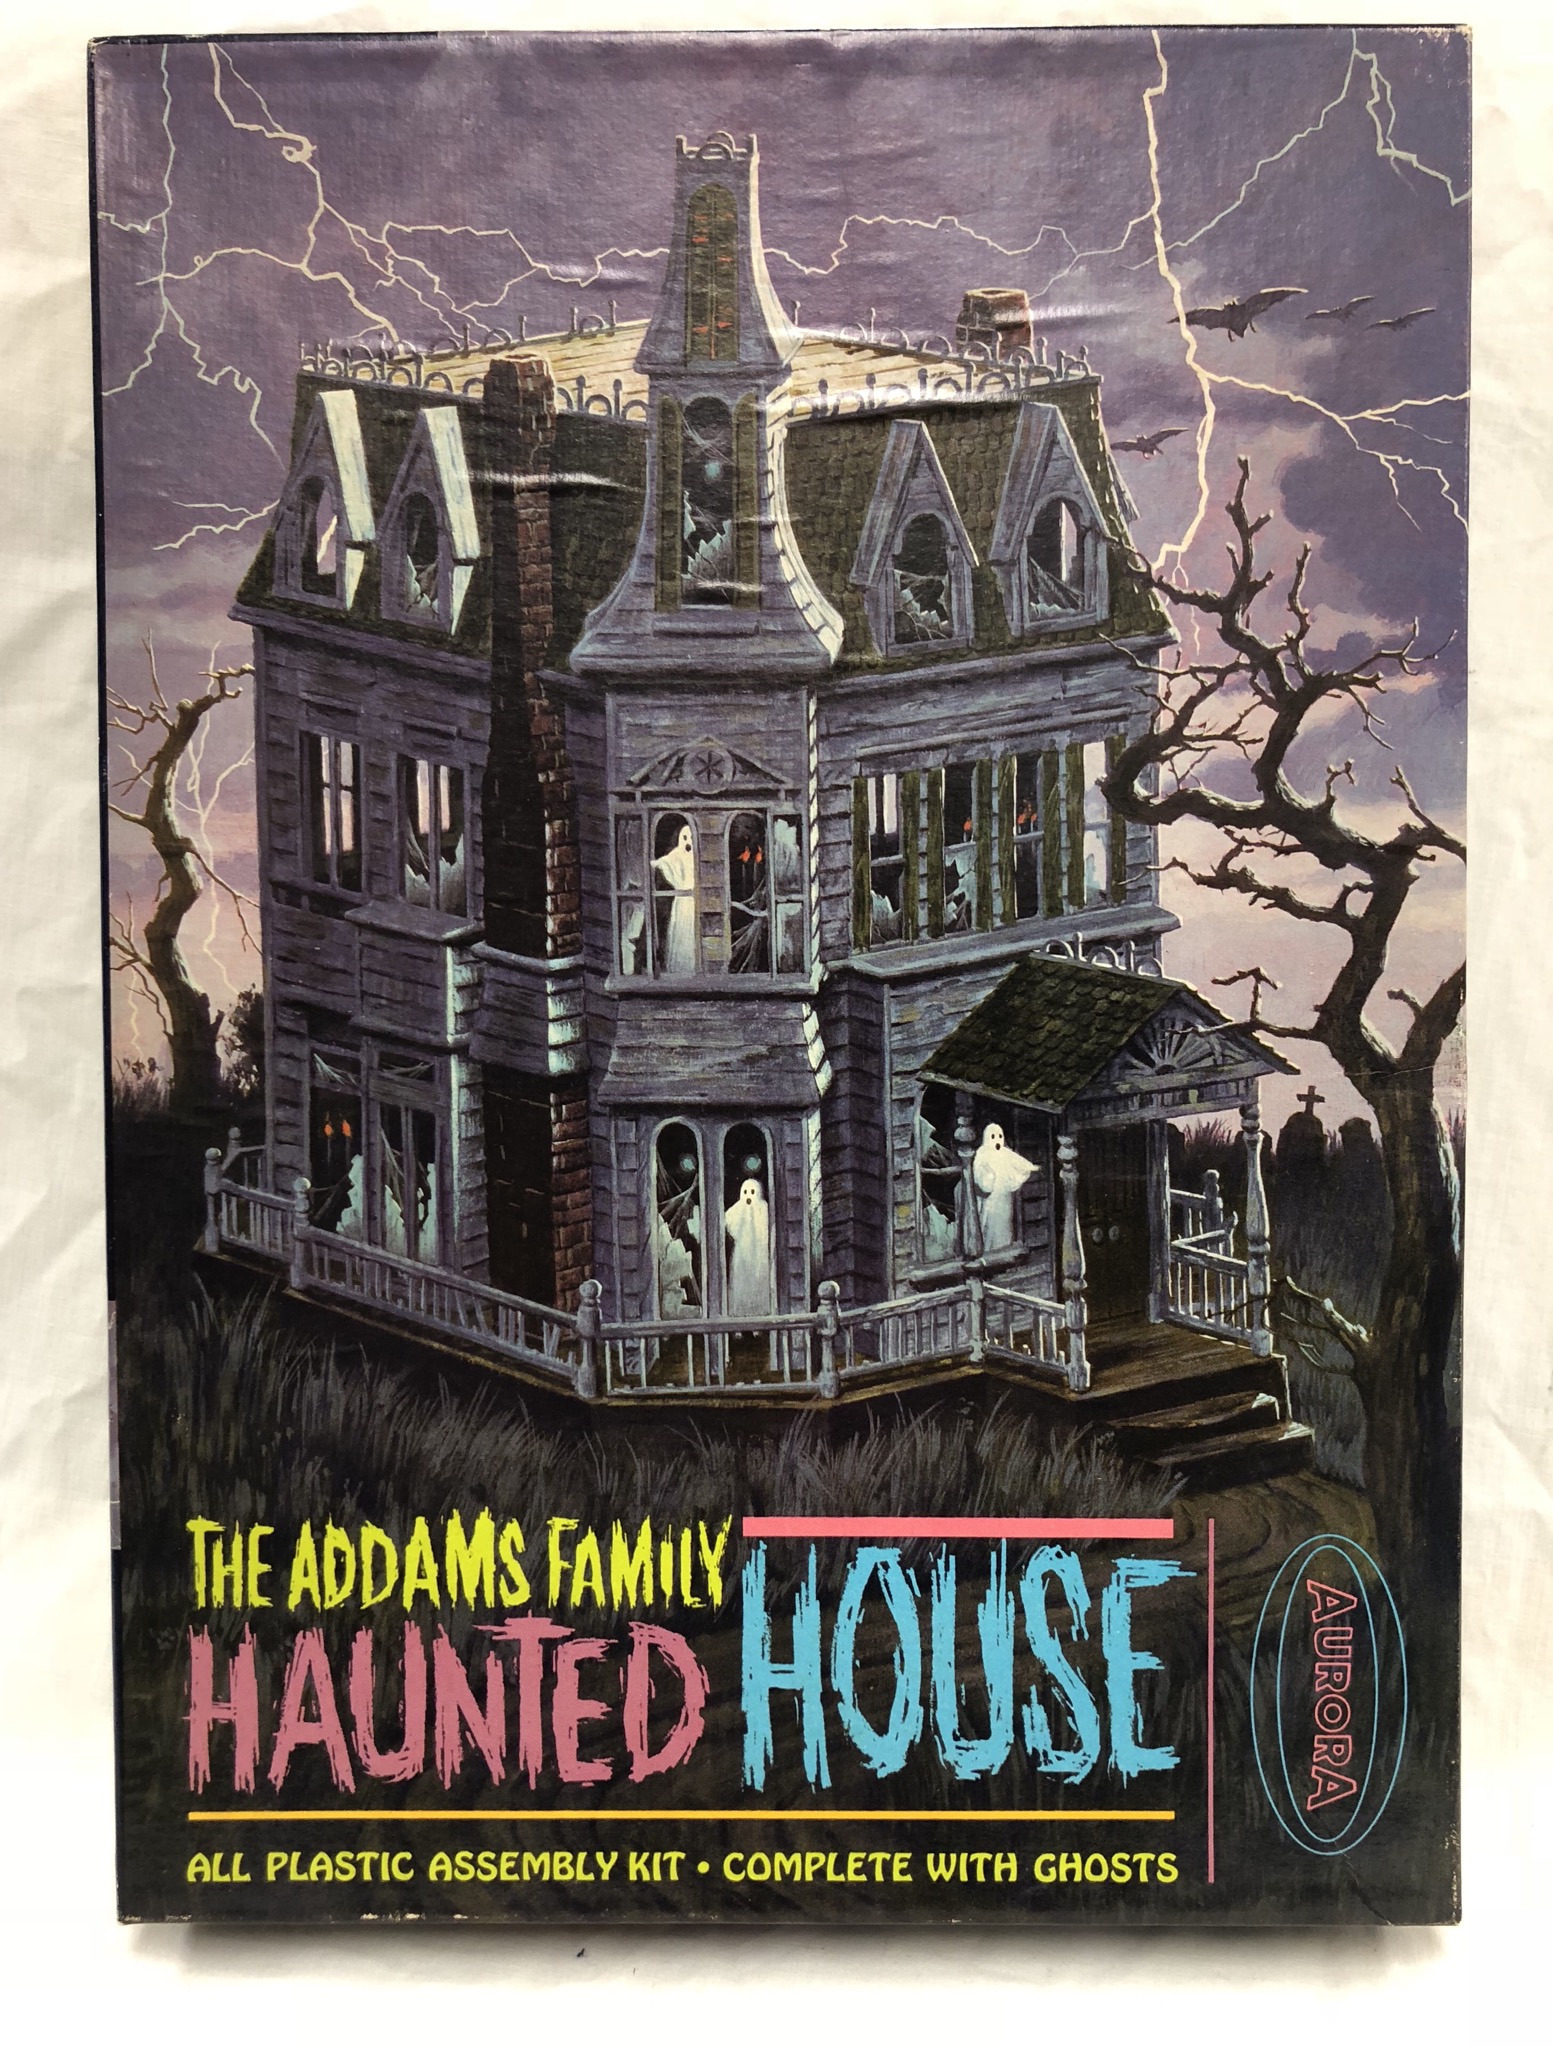 ADDAMS FAMILY HAUNTED HOUSE